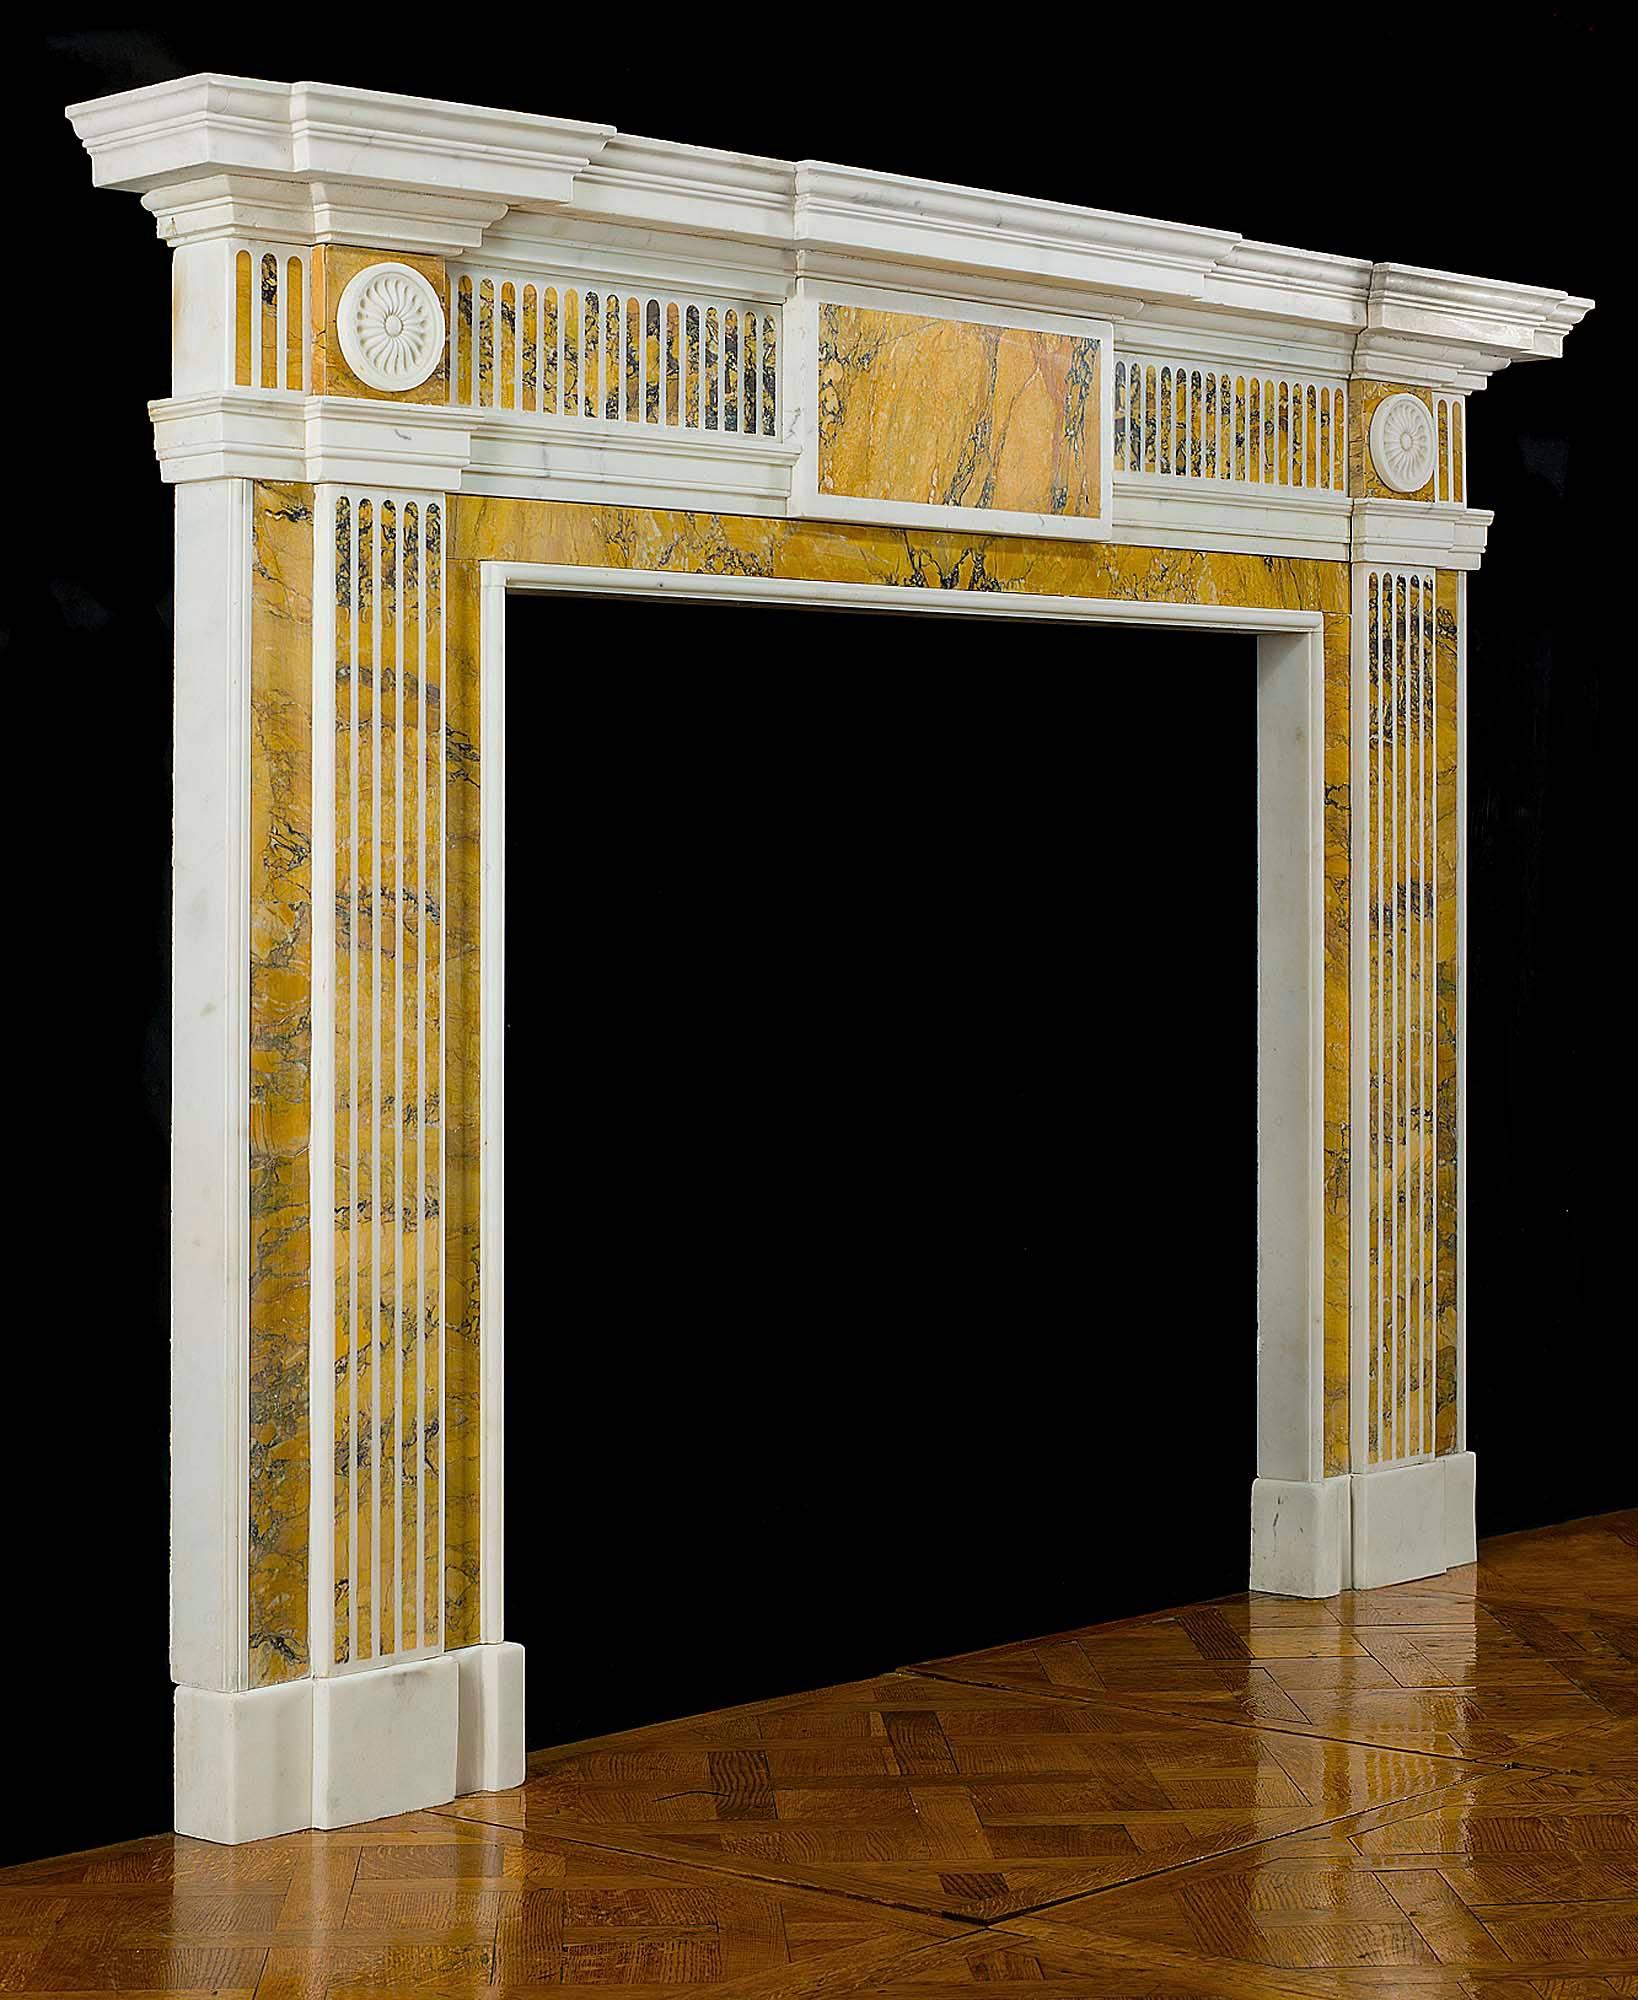 A late Georgian neoclassical chimneypiece in the manner of Robert Adam carved in white statuary marble with yellow Sienna marble inlay. The wide breakfront shelf set over the fluted frieze centered by a large tablet also of purple veined yellow